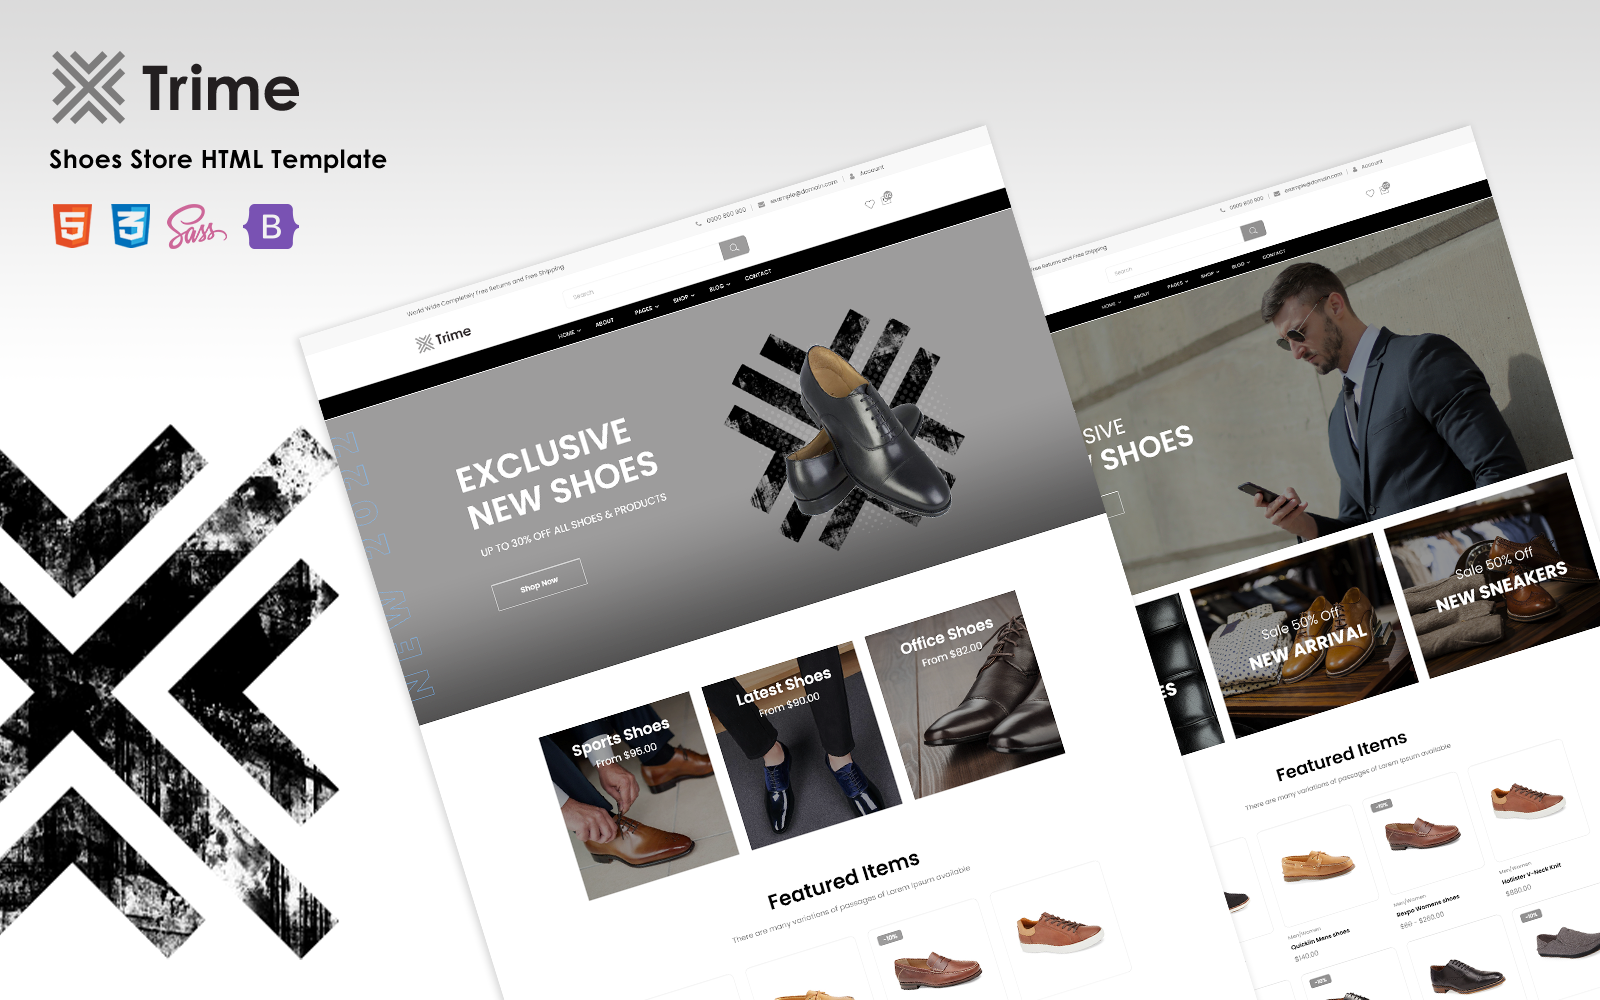 Trime - Shoes Store HTML Template